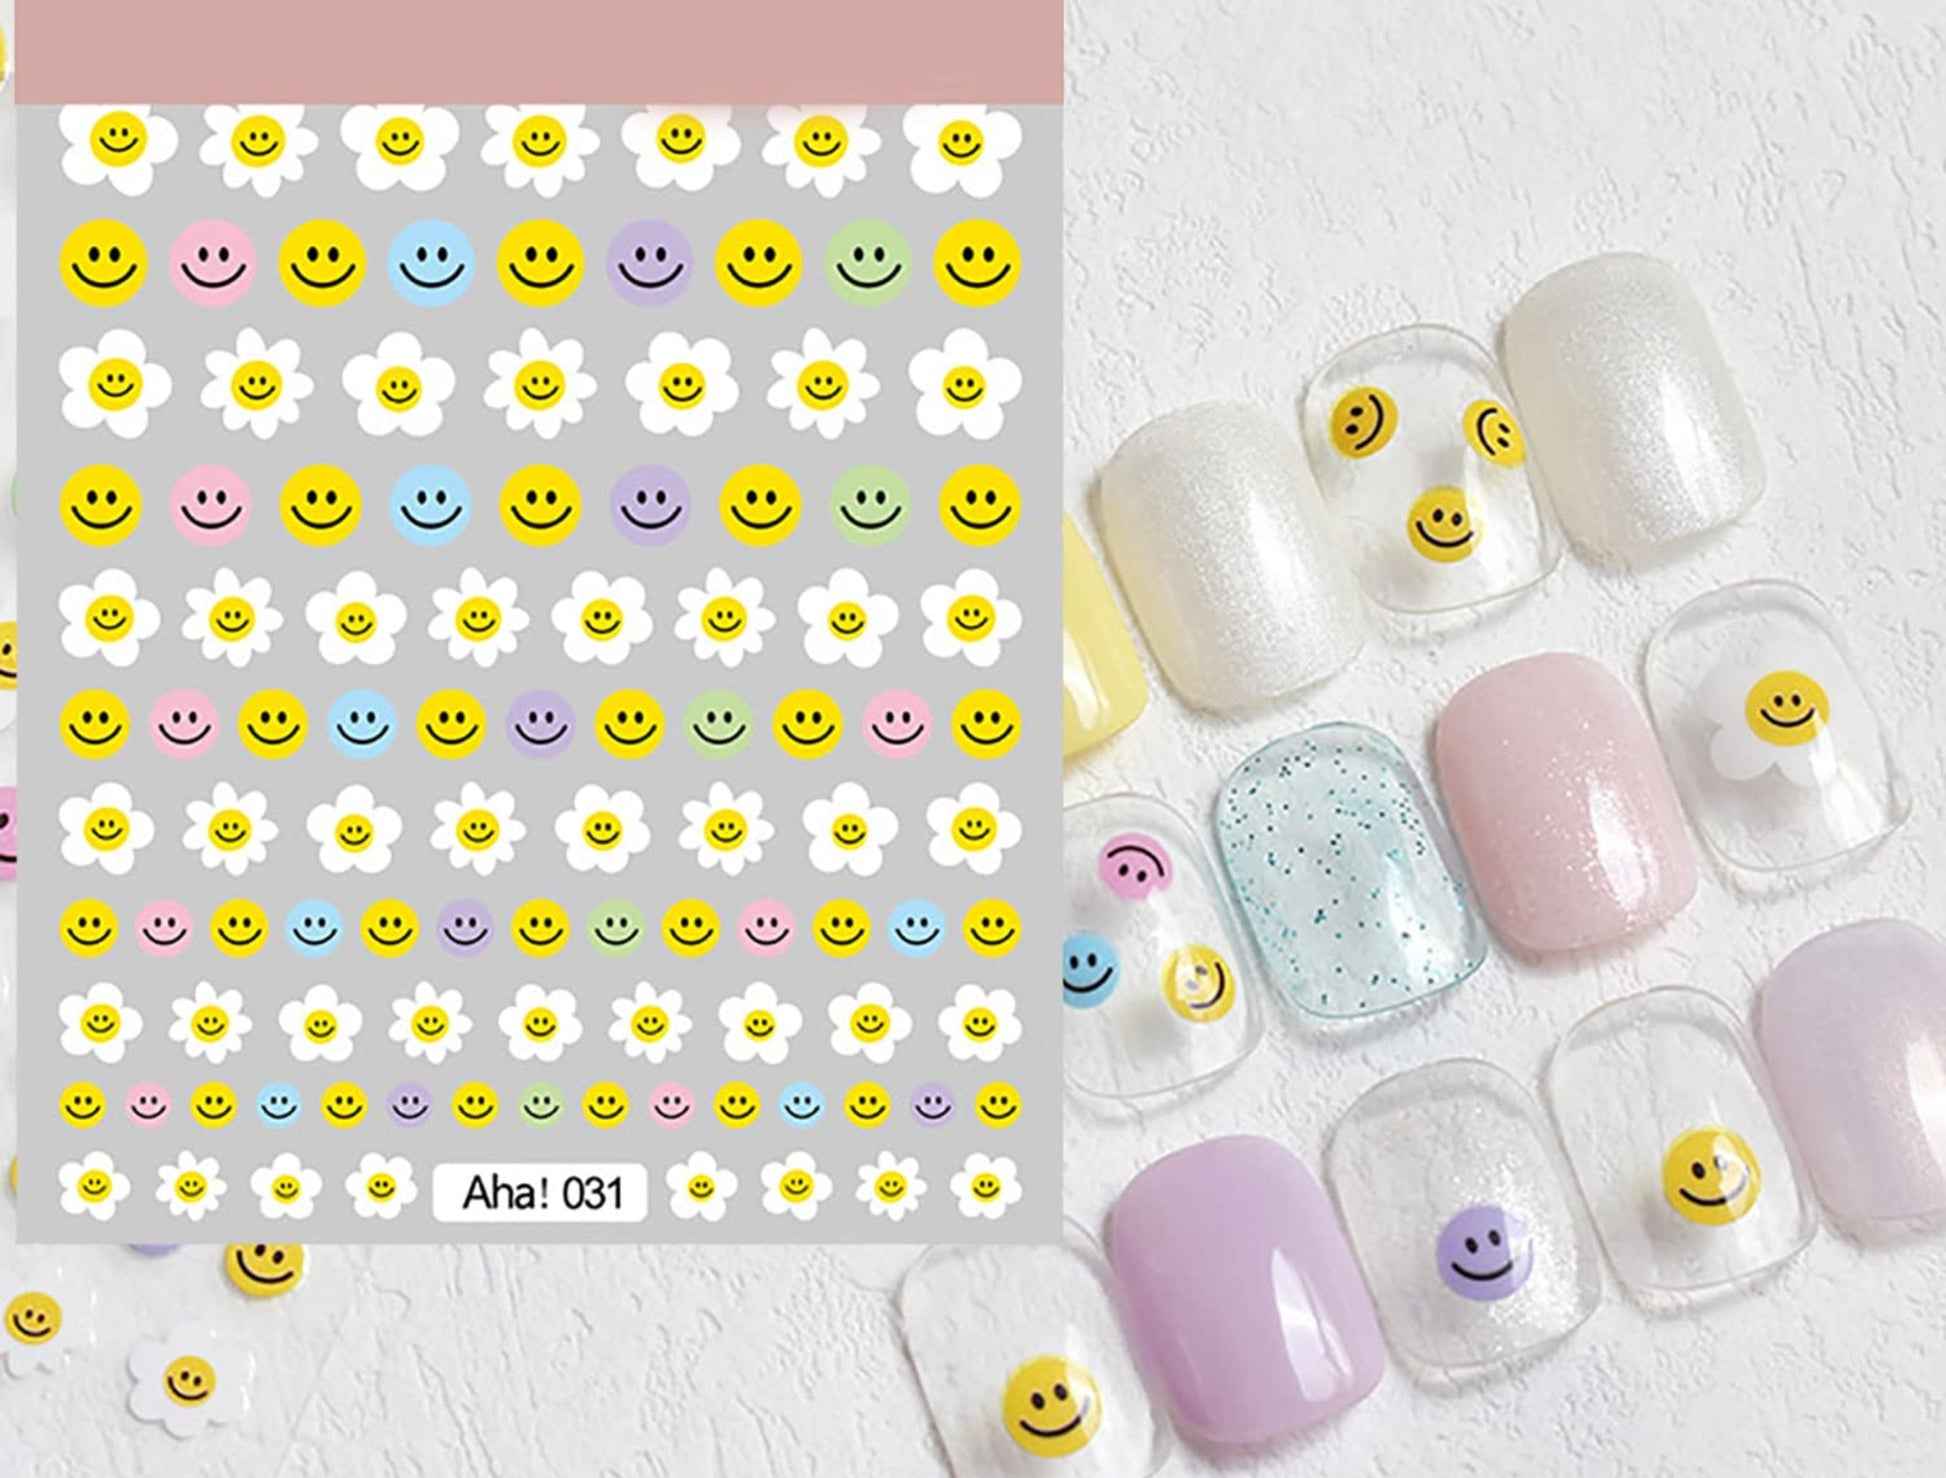 Kawaii Nail Decals, Smiley Flower Nail Stickers, Pastel Daisy Nail Decal, Cute Smiley Nail Decals, Happy Face Nail Stickers